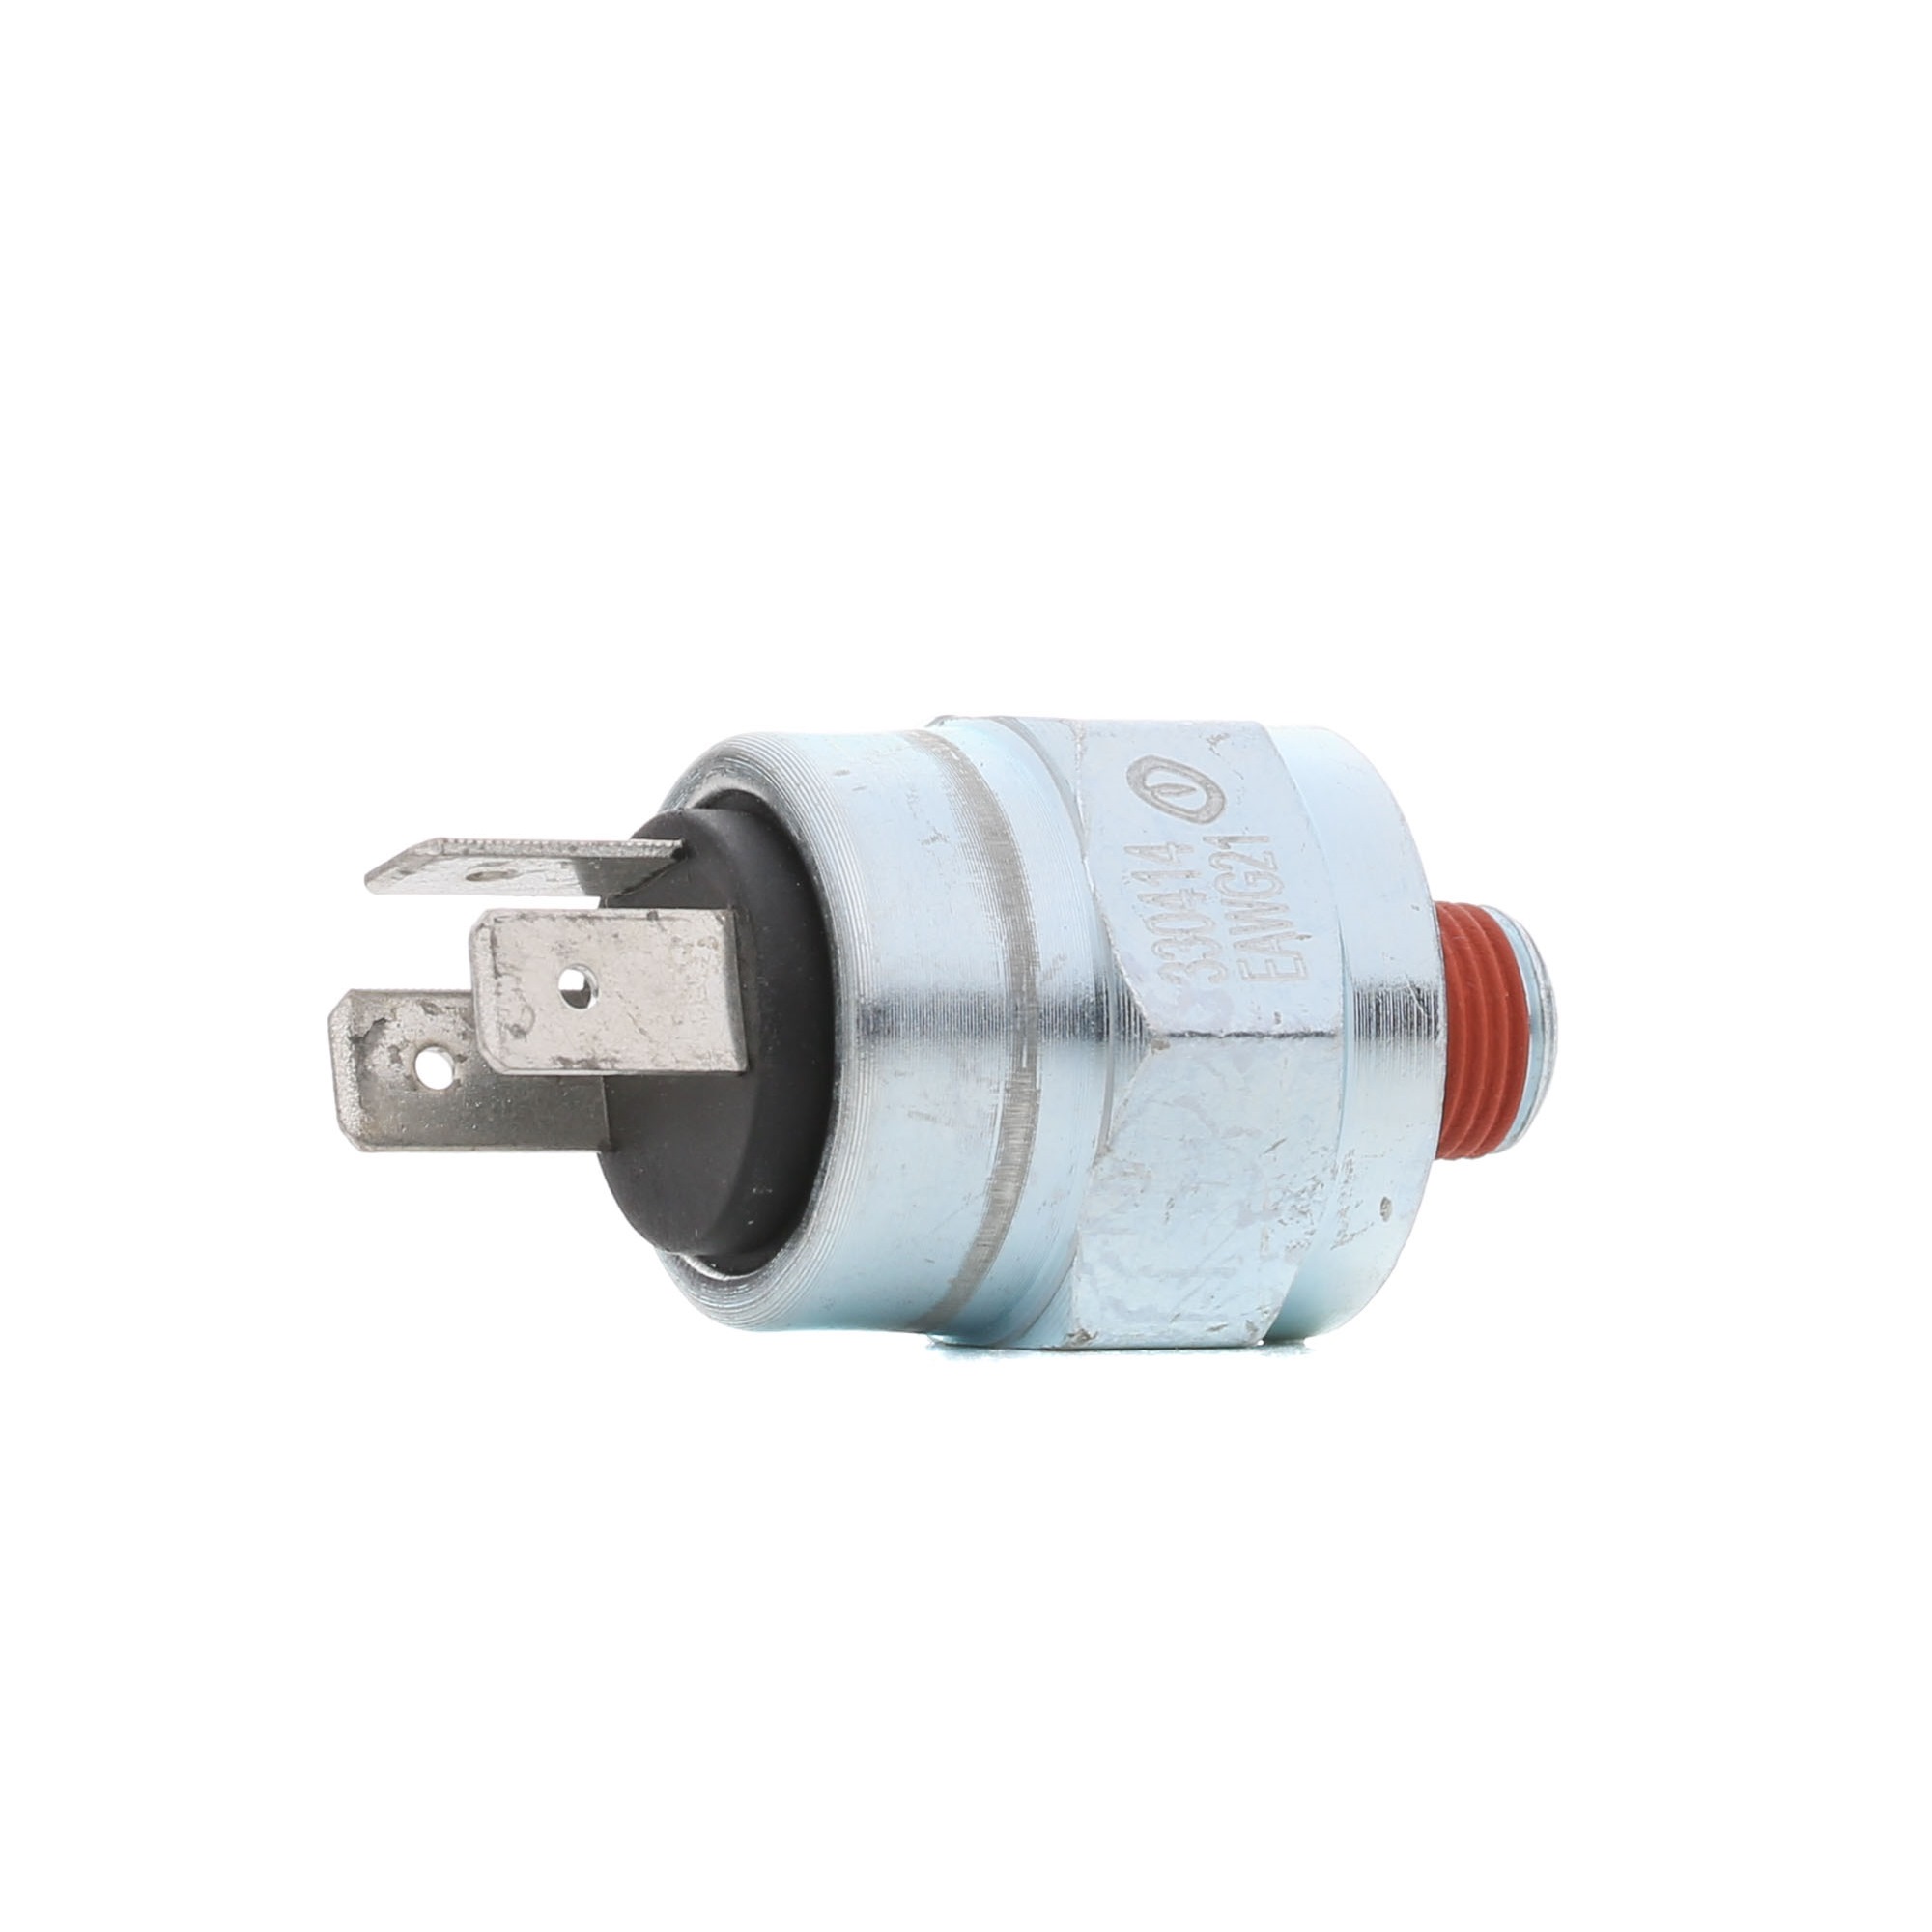 ERA Hydraulic, M10 x 1, 3-pin connector Number of pins: 3-pin connector Stop light switch 330414 buy